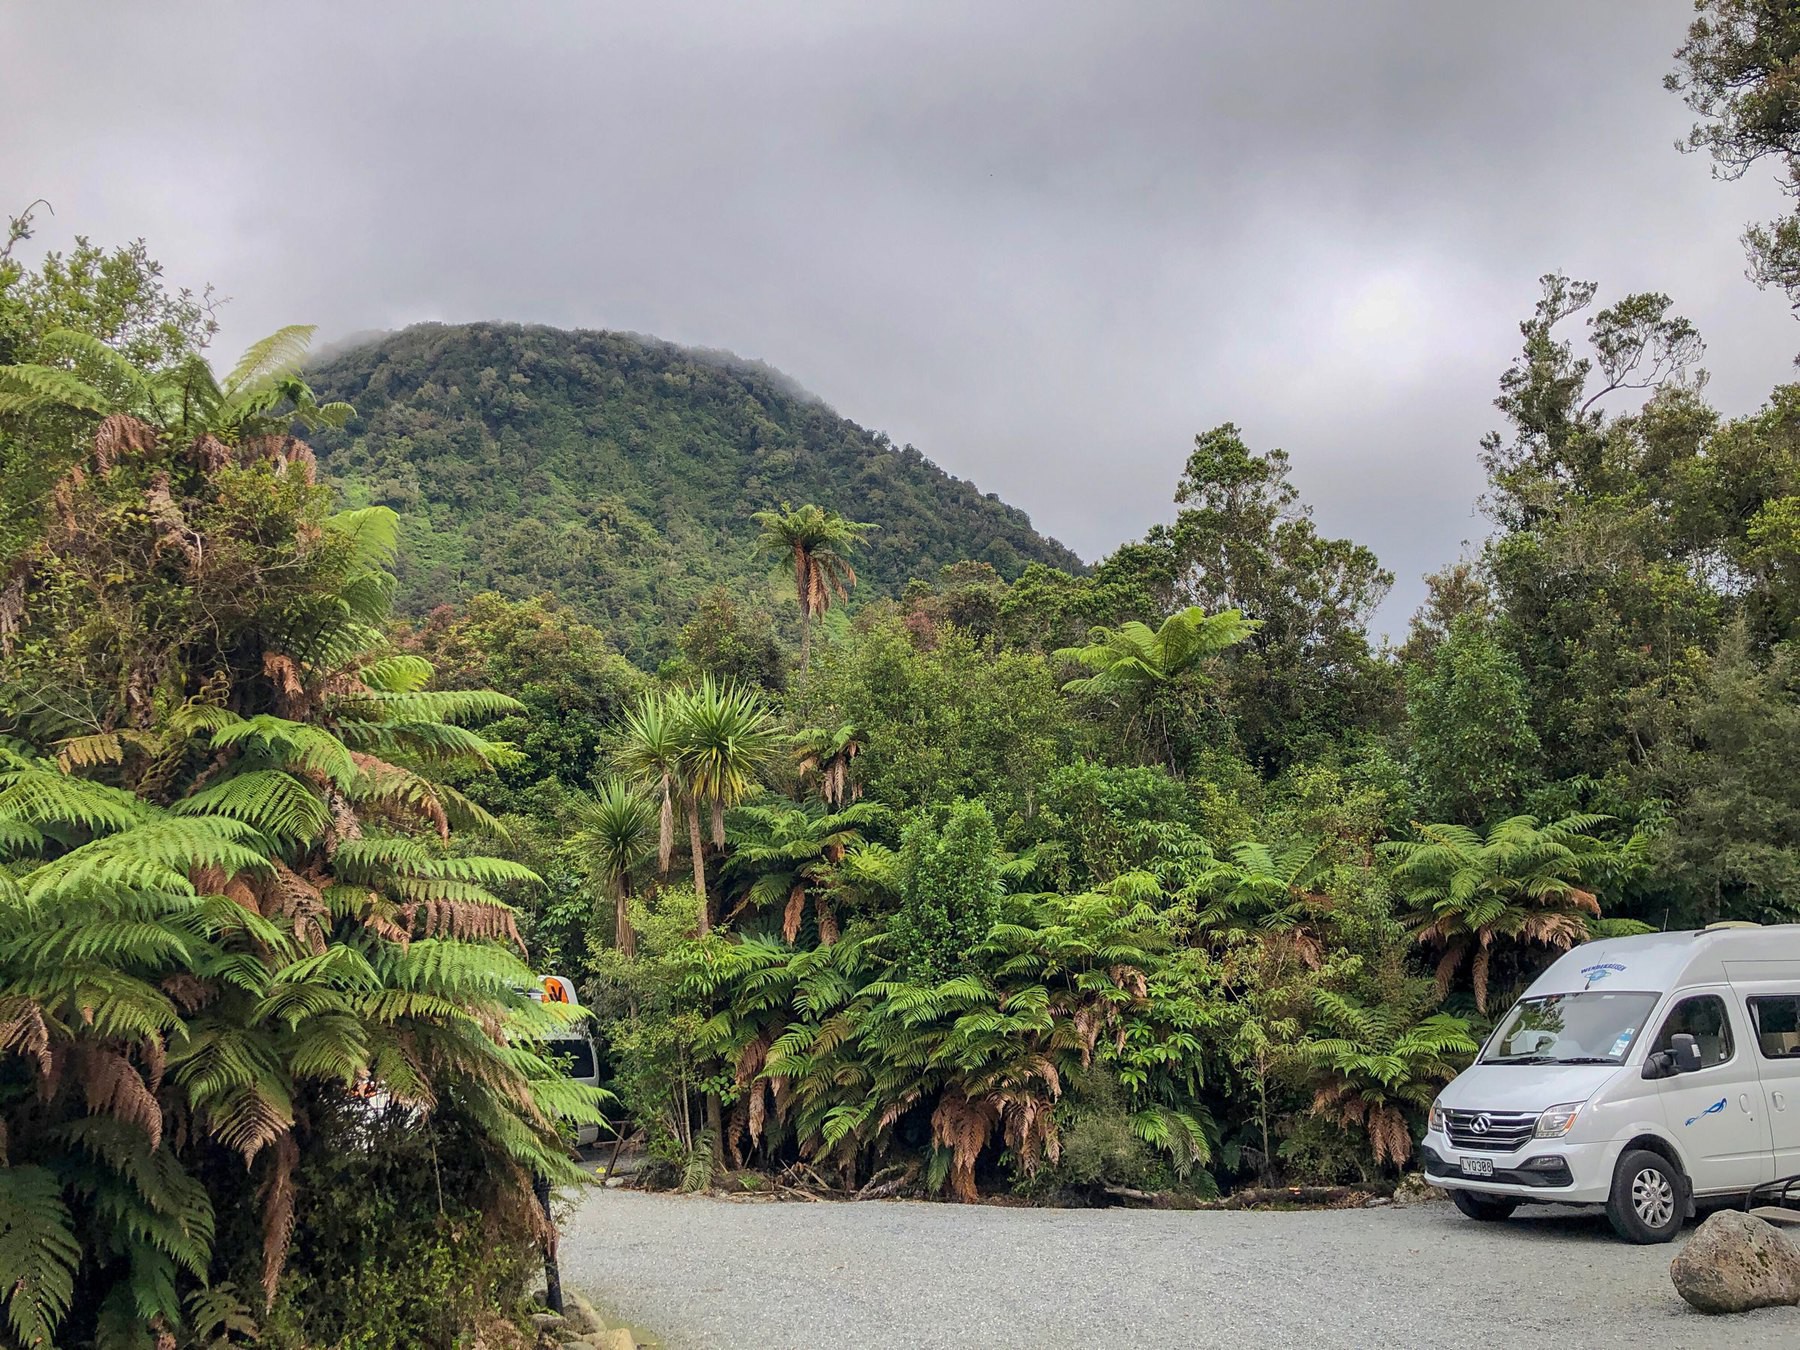 campervan in a park beneath a mountain. palm trees around